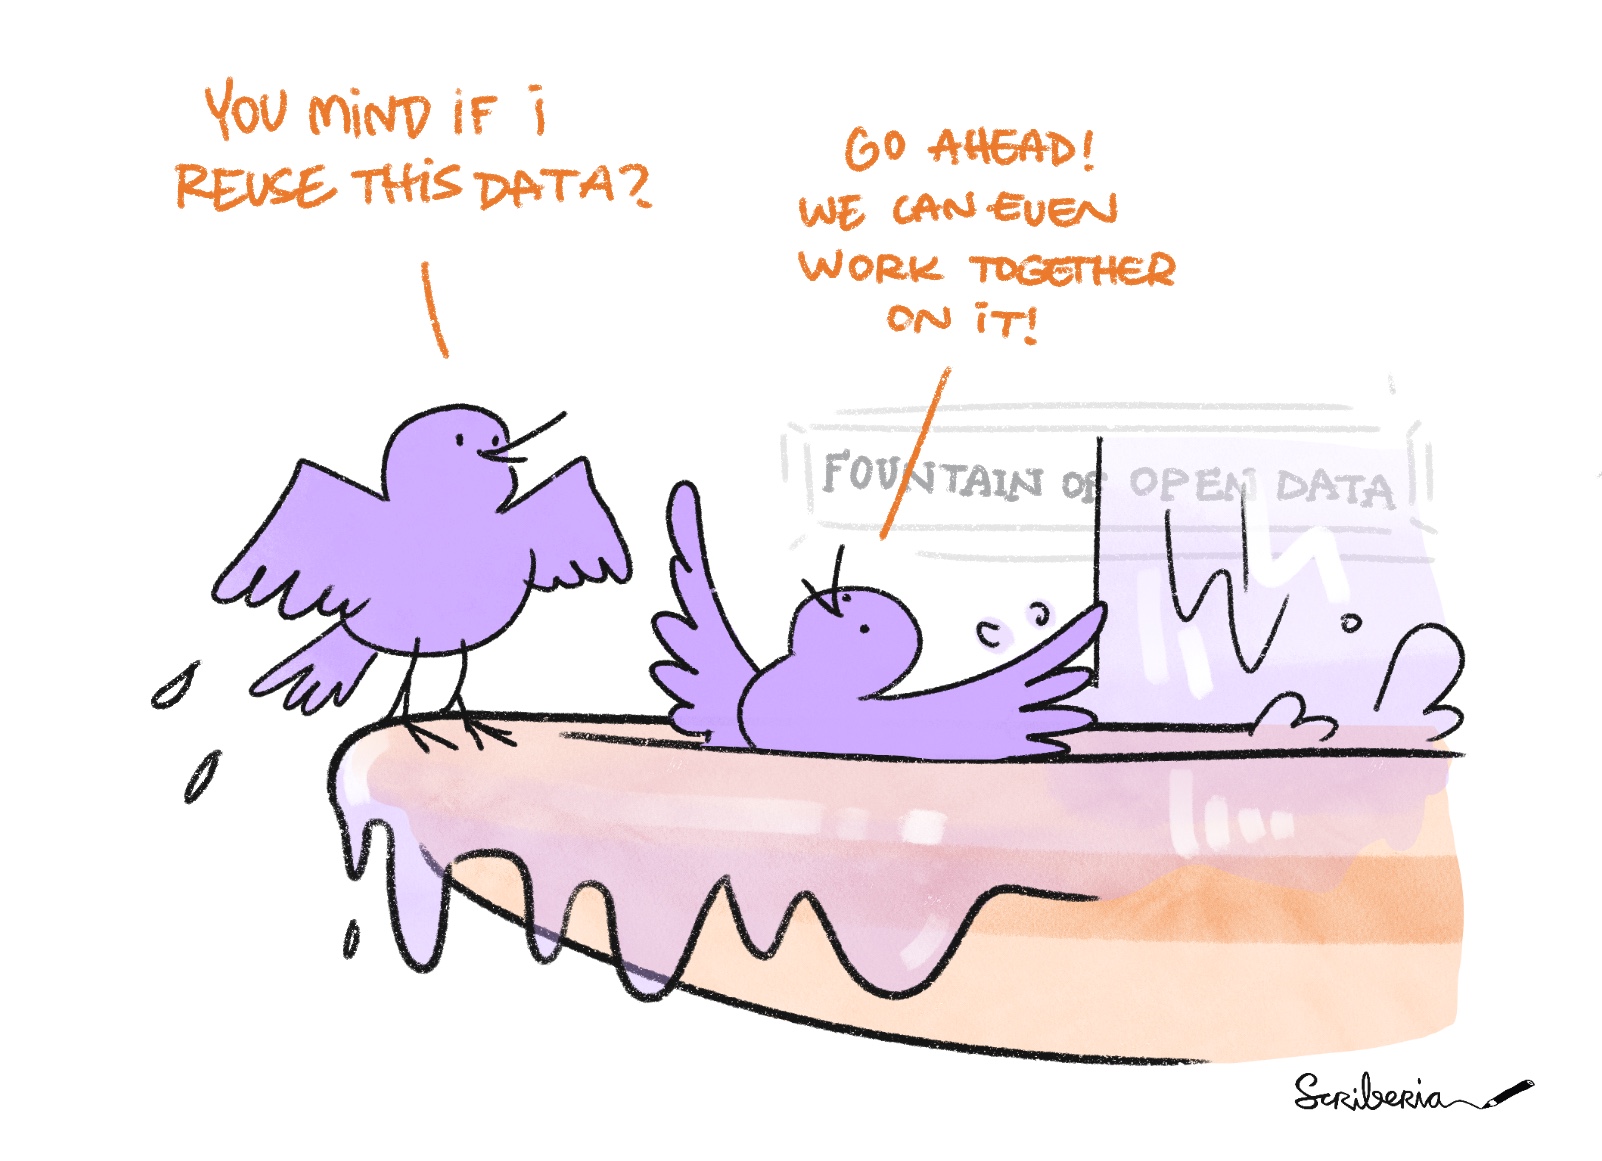 Two birds in a fountain of open data. One asks "You mind if I reuse this data?" The other answers "Go ahead! We can even work together on it!"